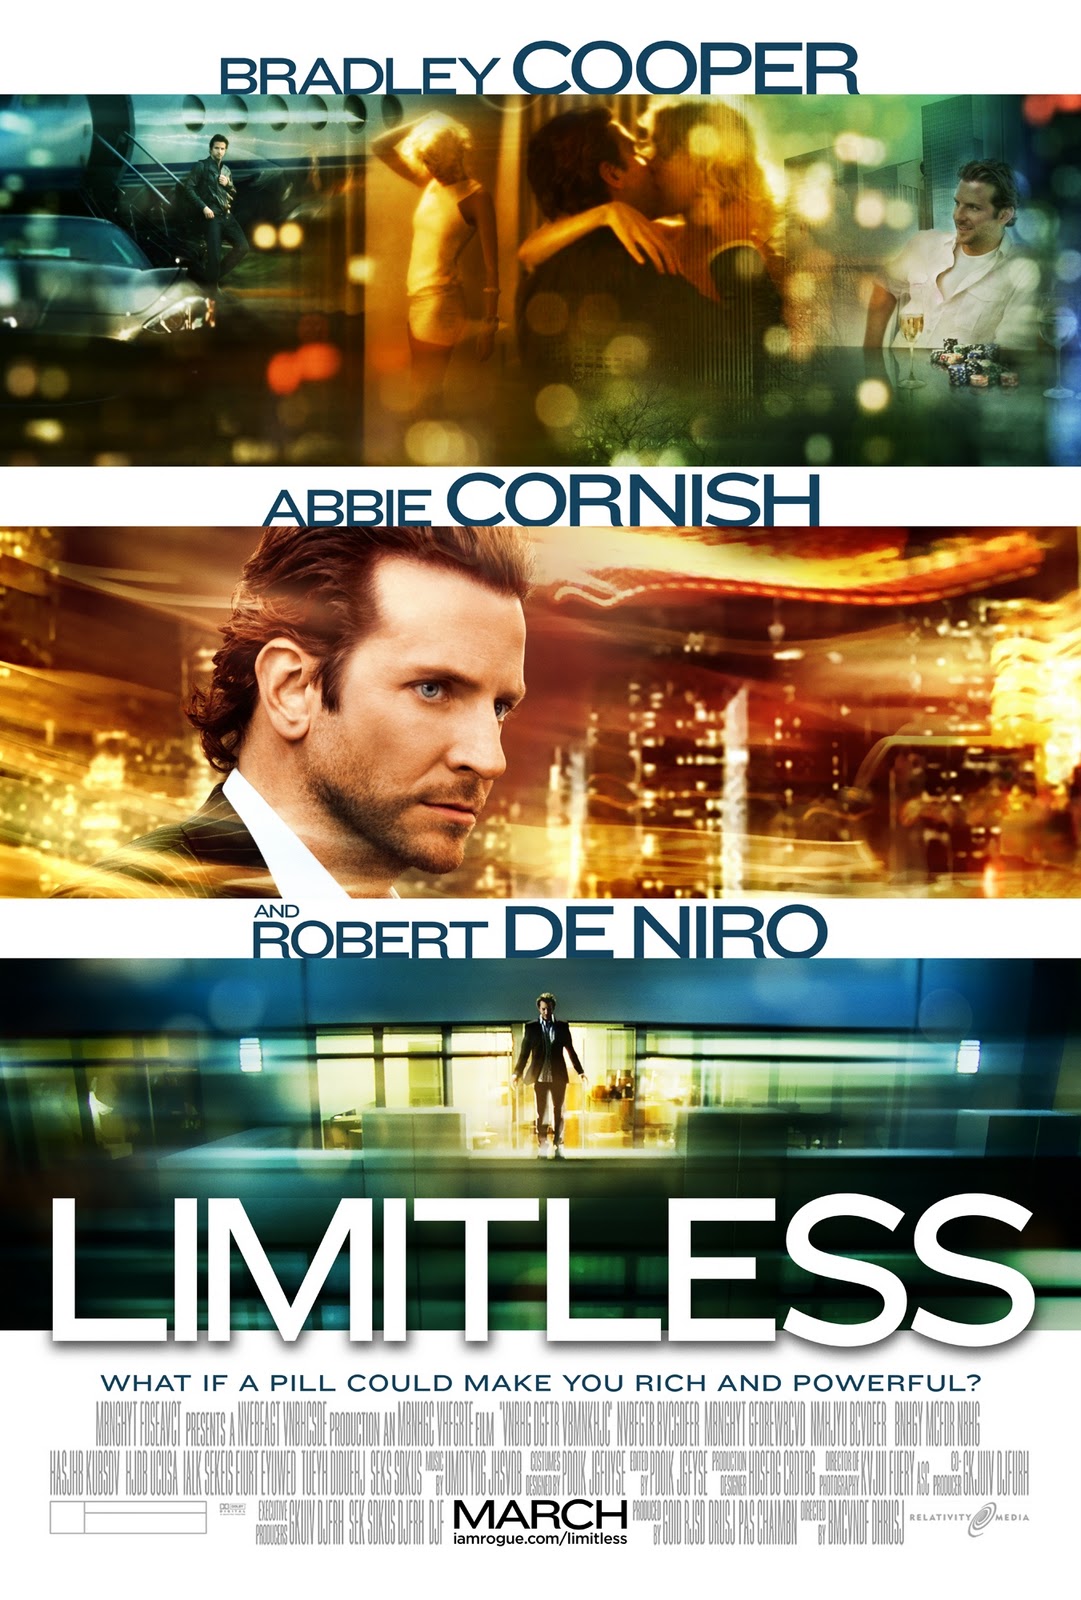 Limitless-Poster - We Are Movie Geeks1081 x 1600